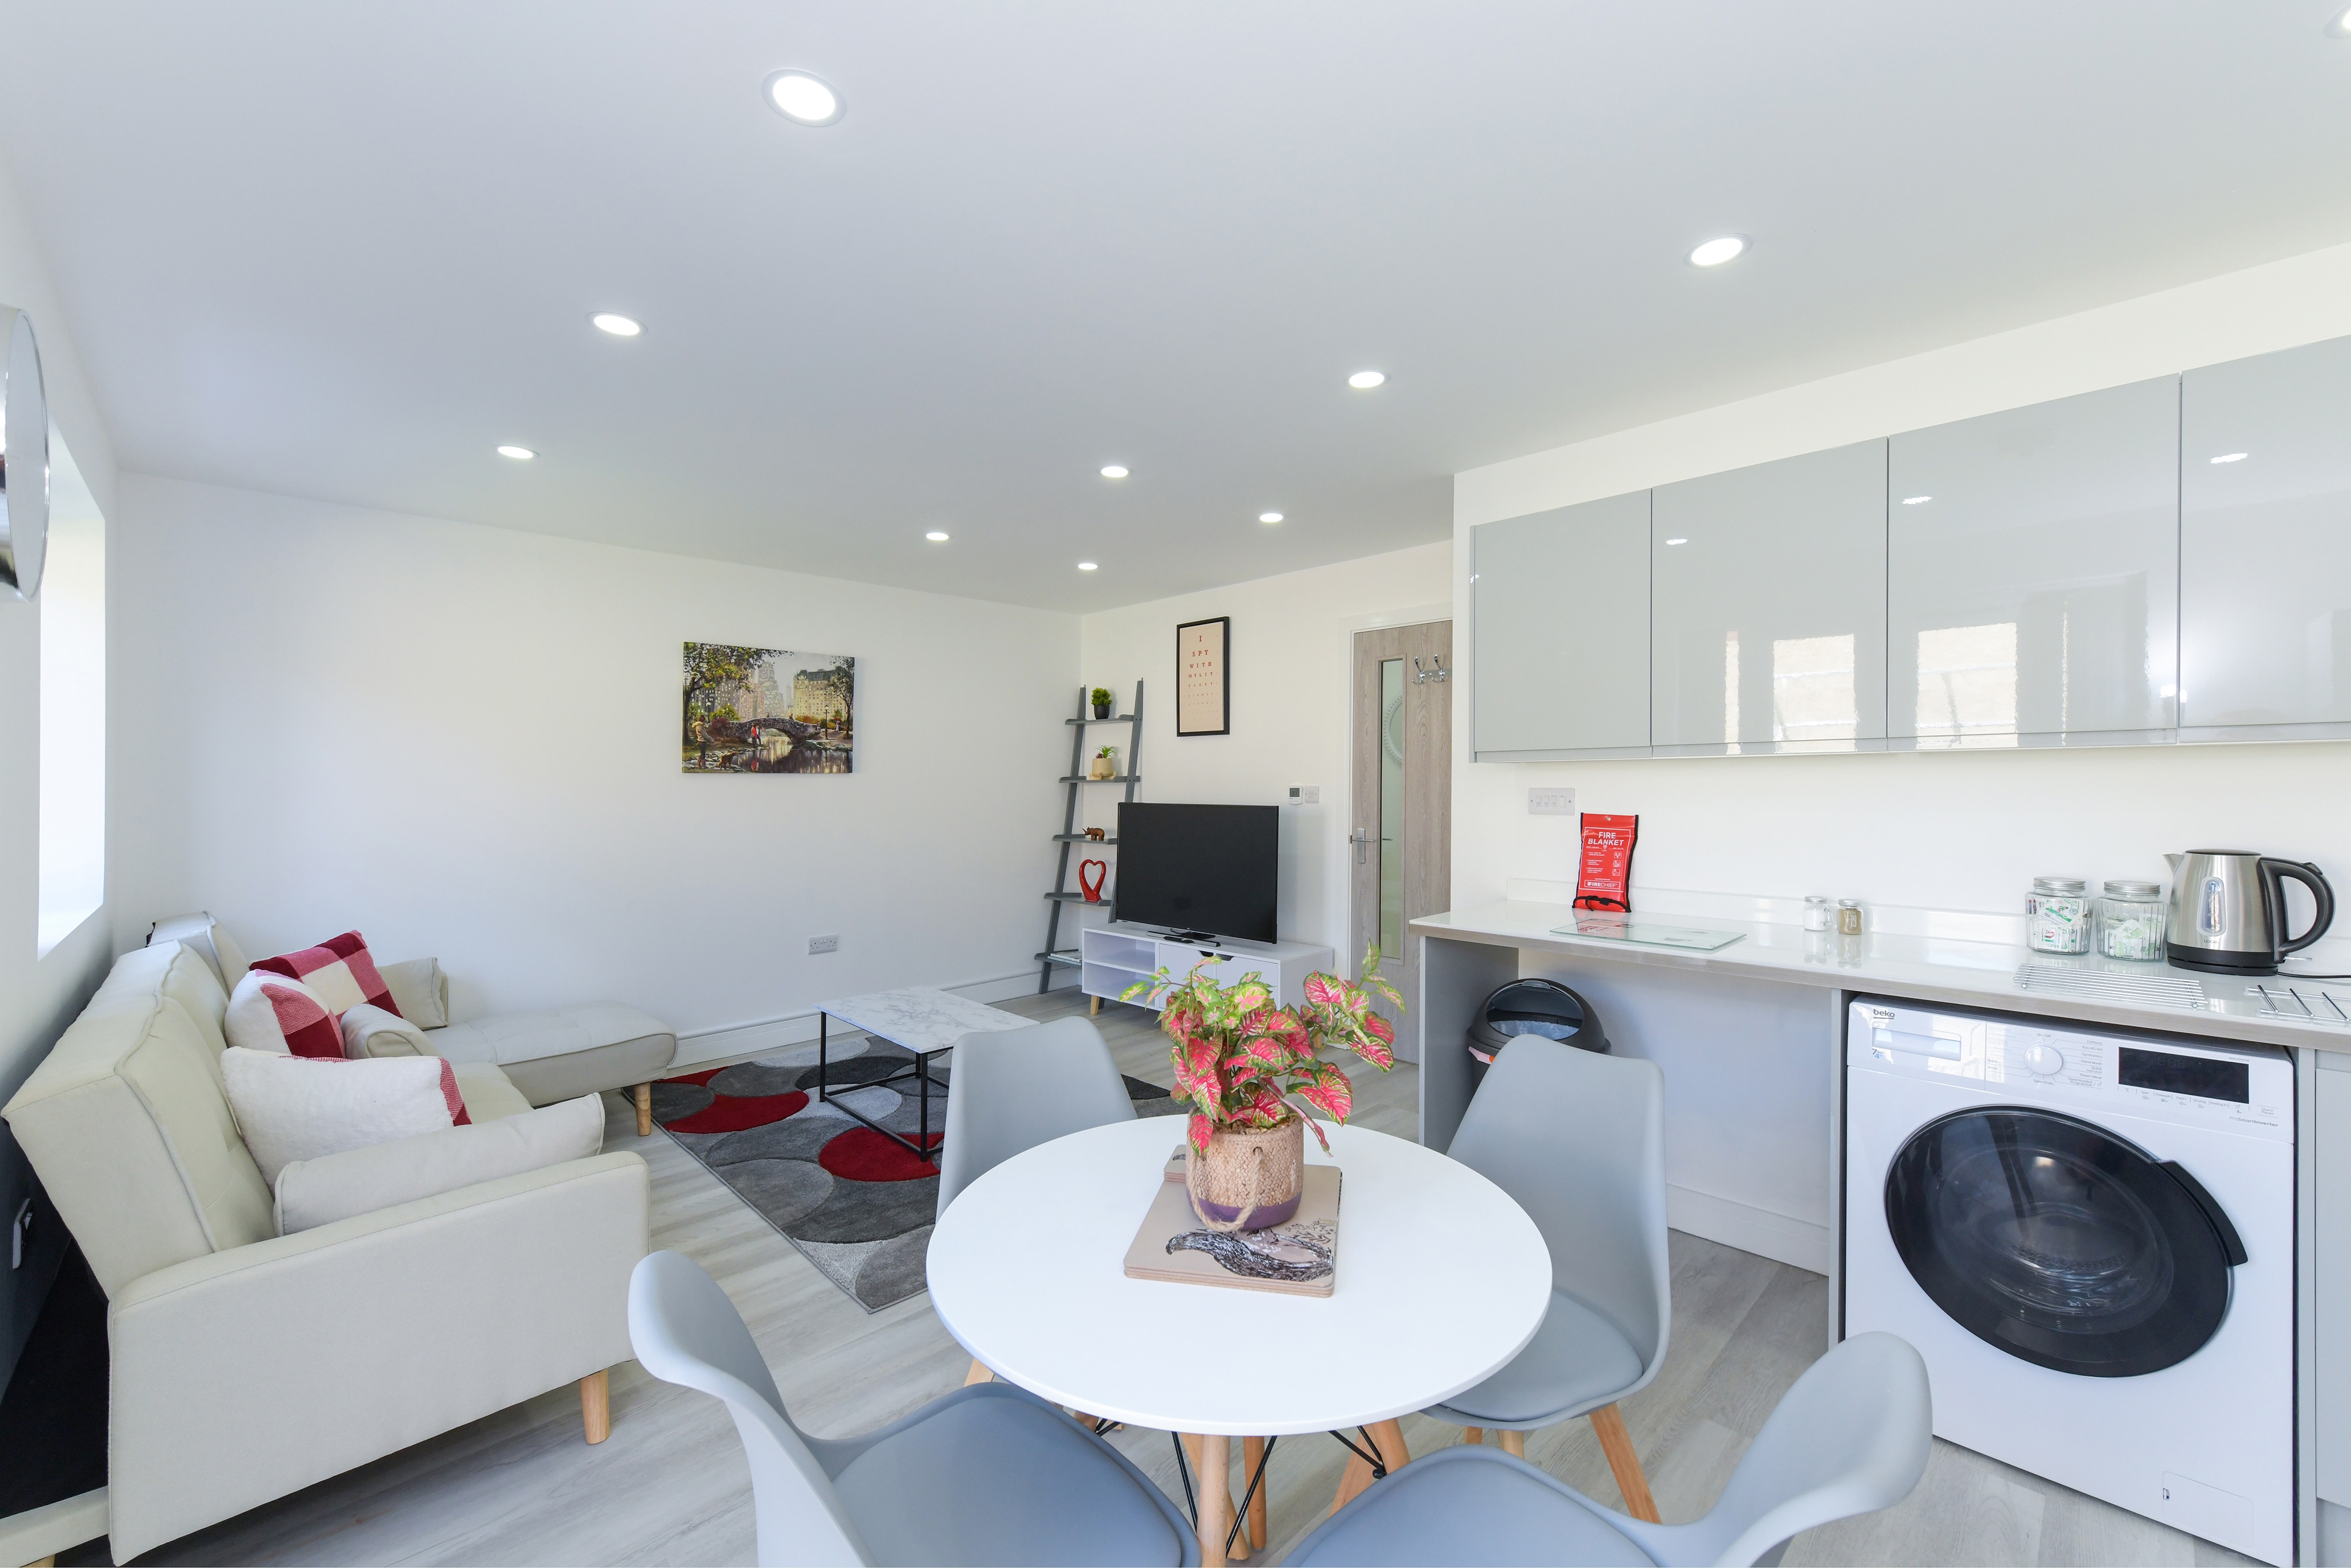 Property Image 1 - Contemporary & Chic 2bed Home, Low Carbon, Parking